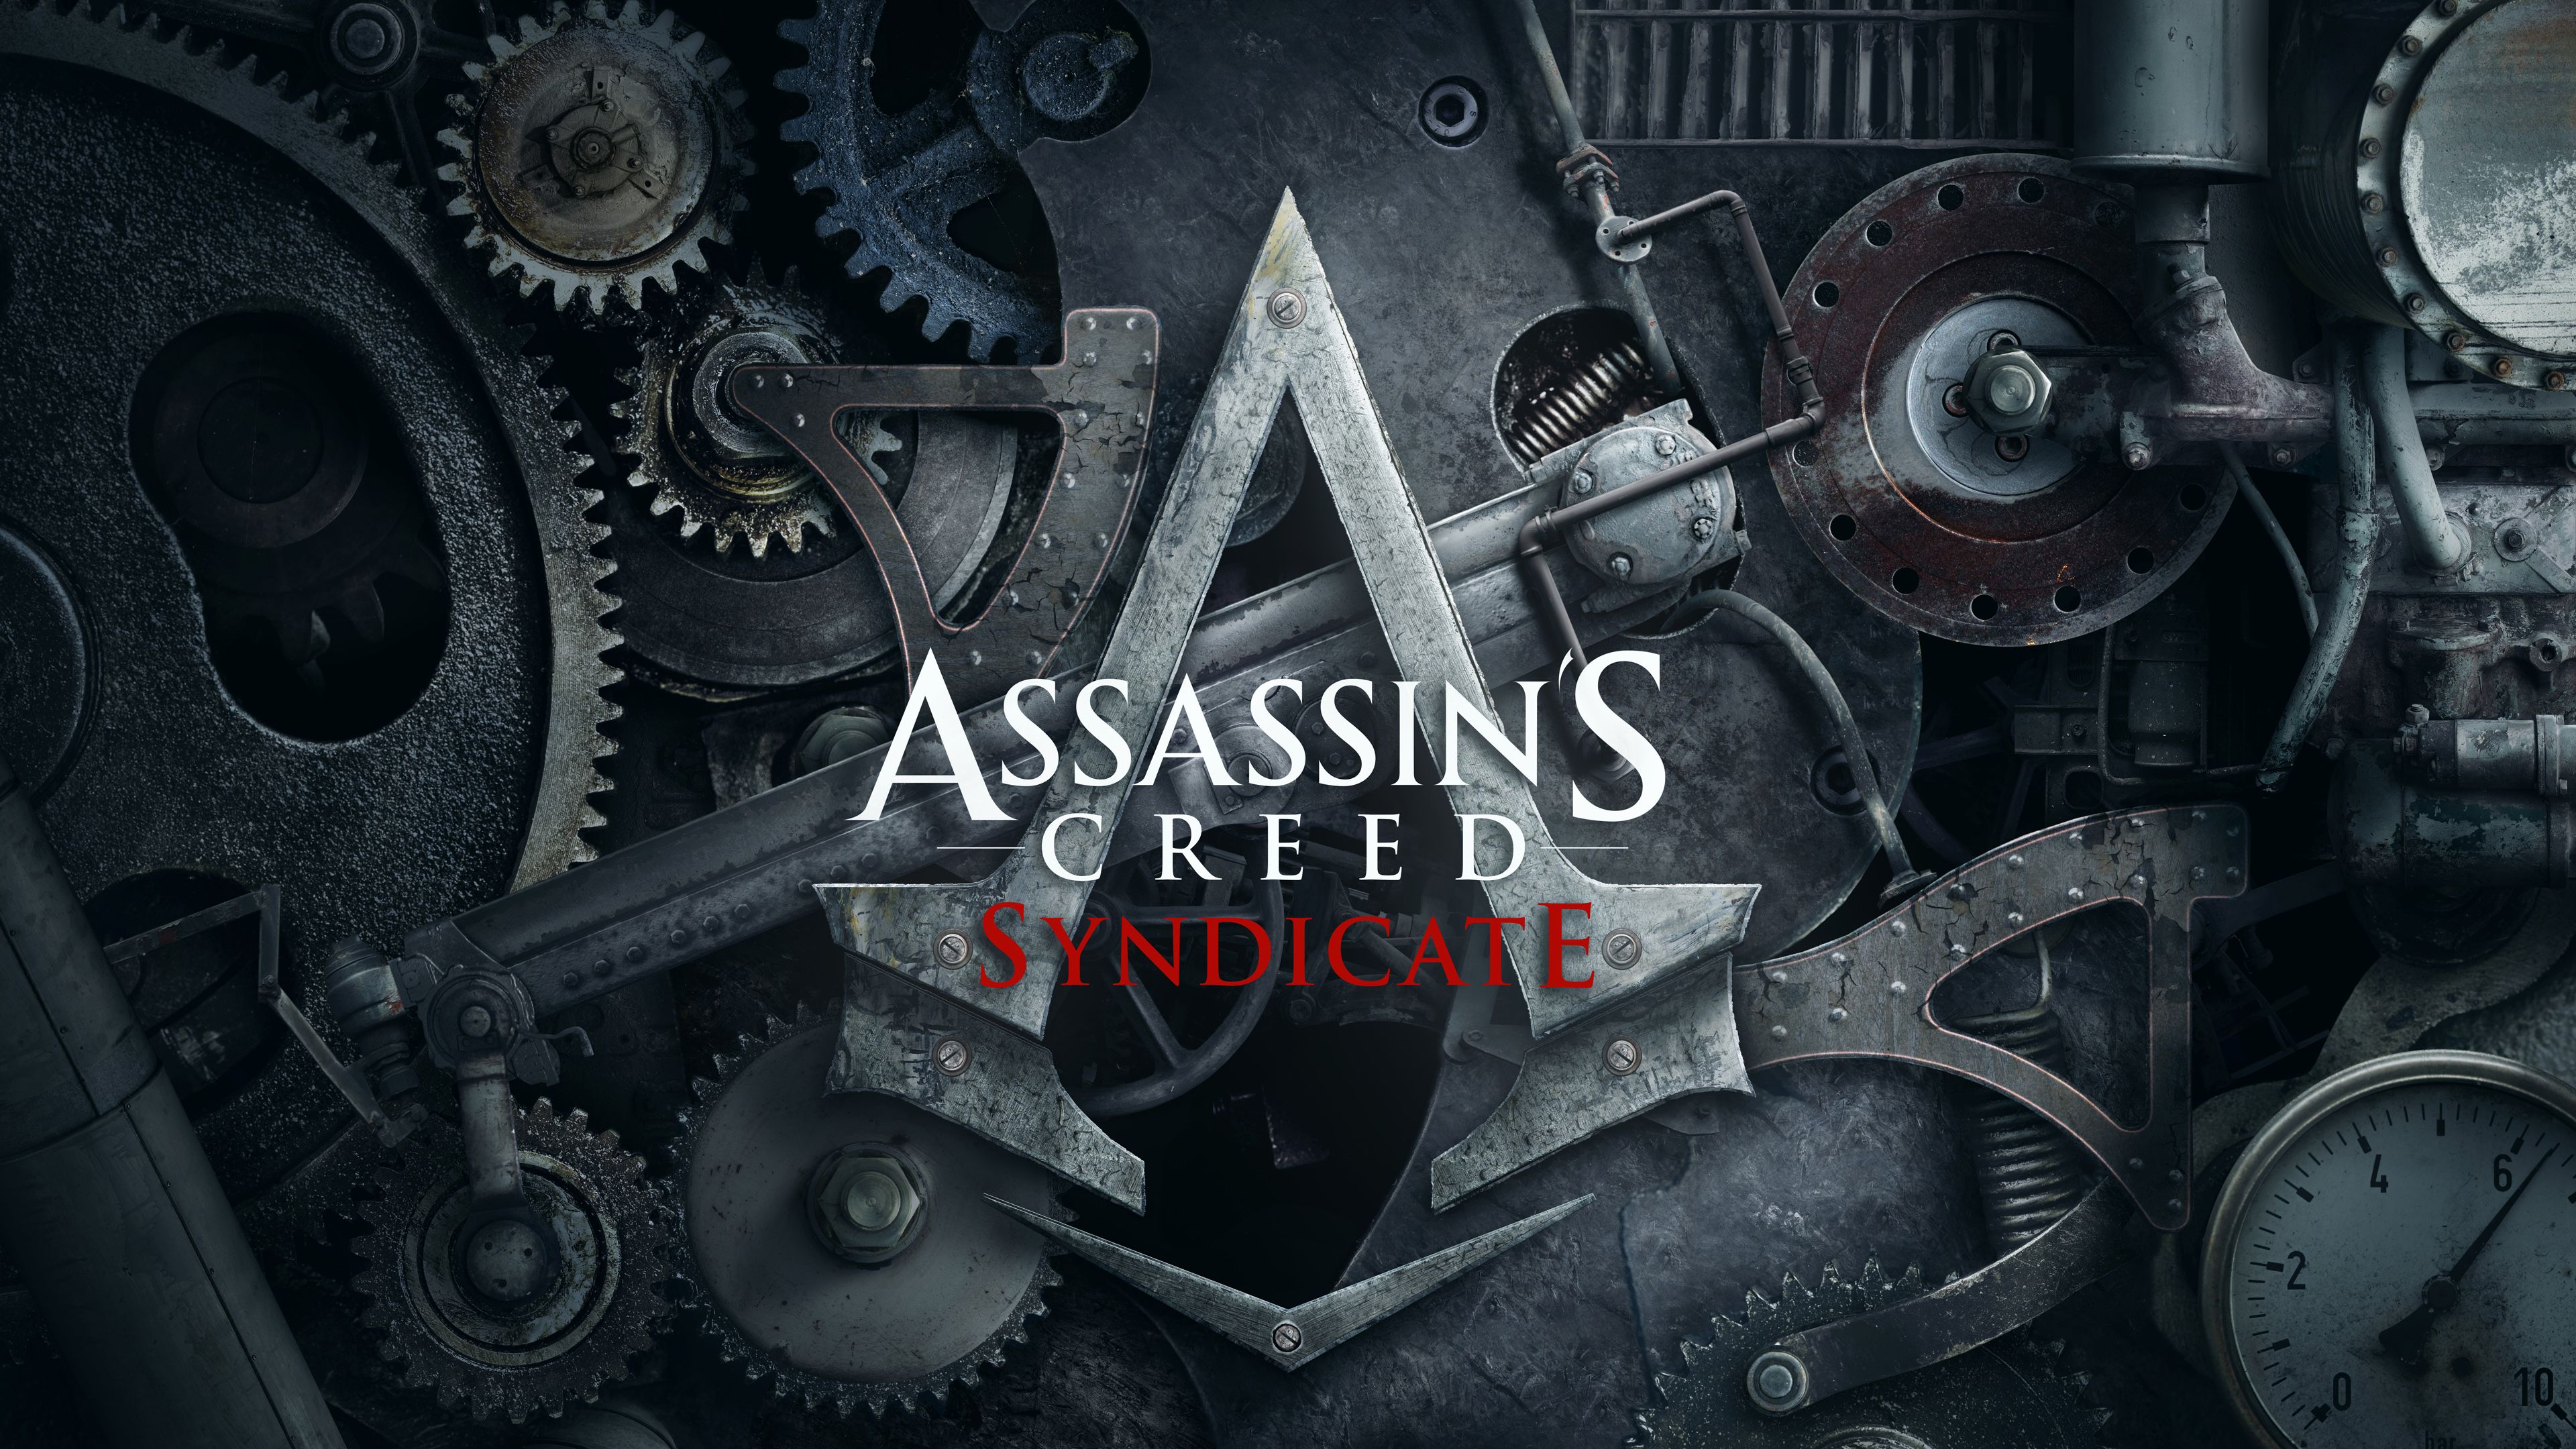 Assassin's Creed Syndicate Logo Wallpaper